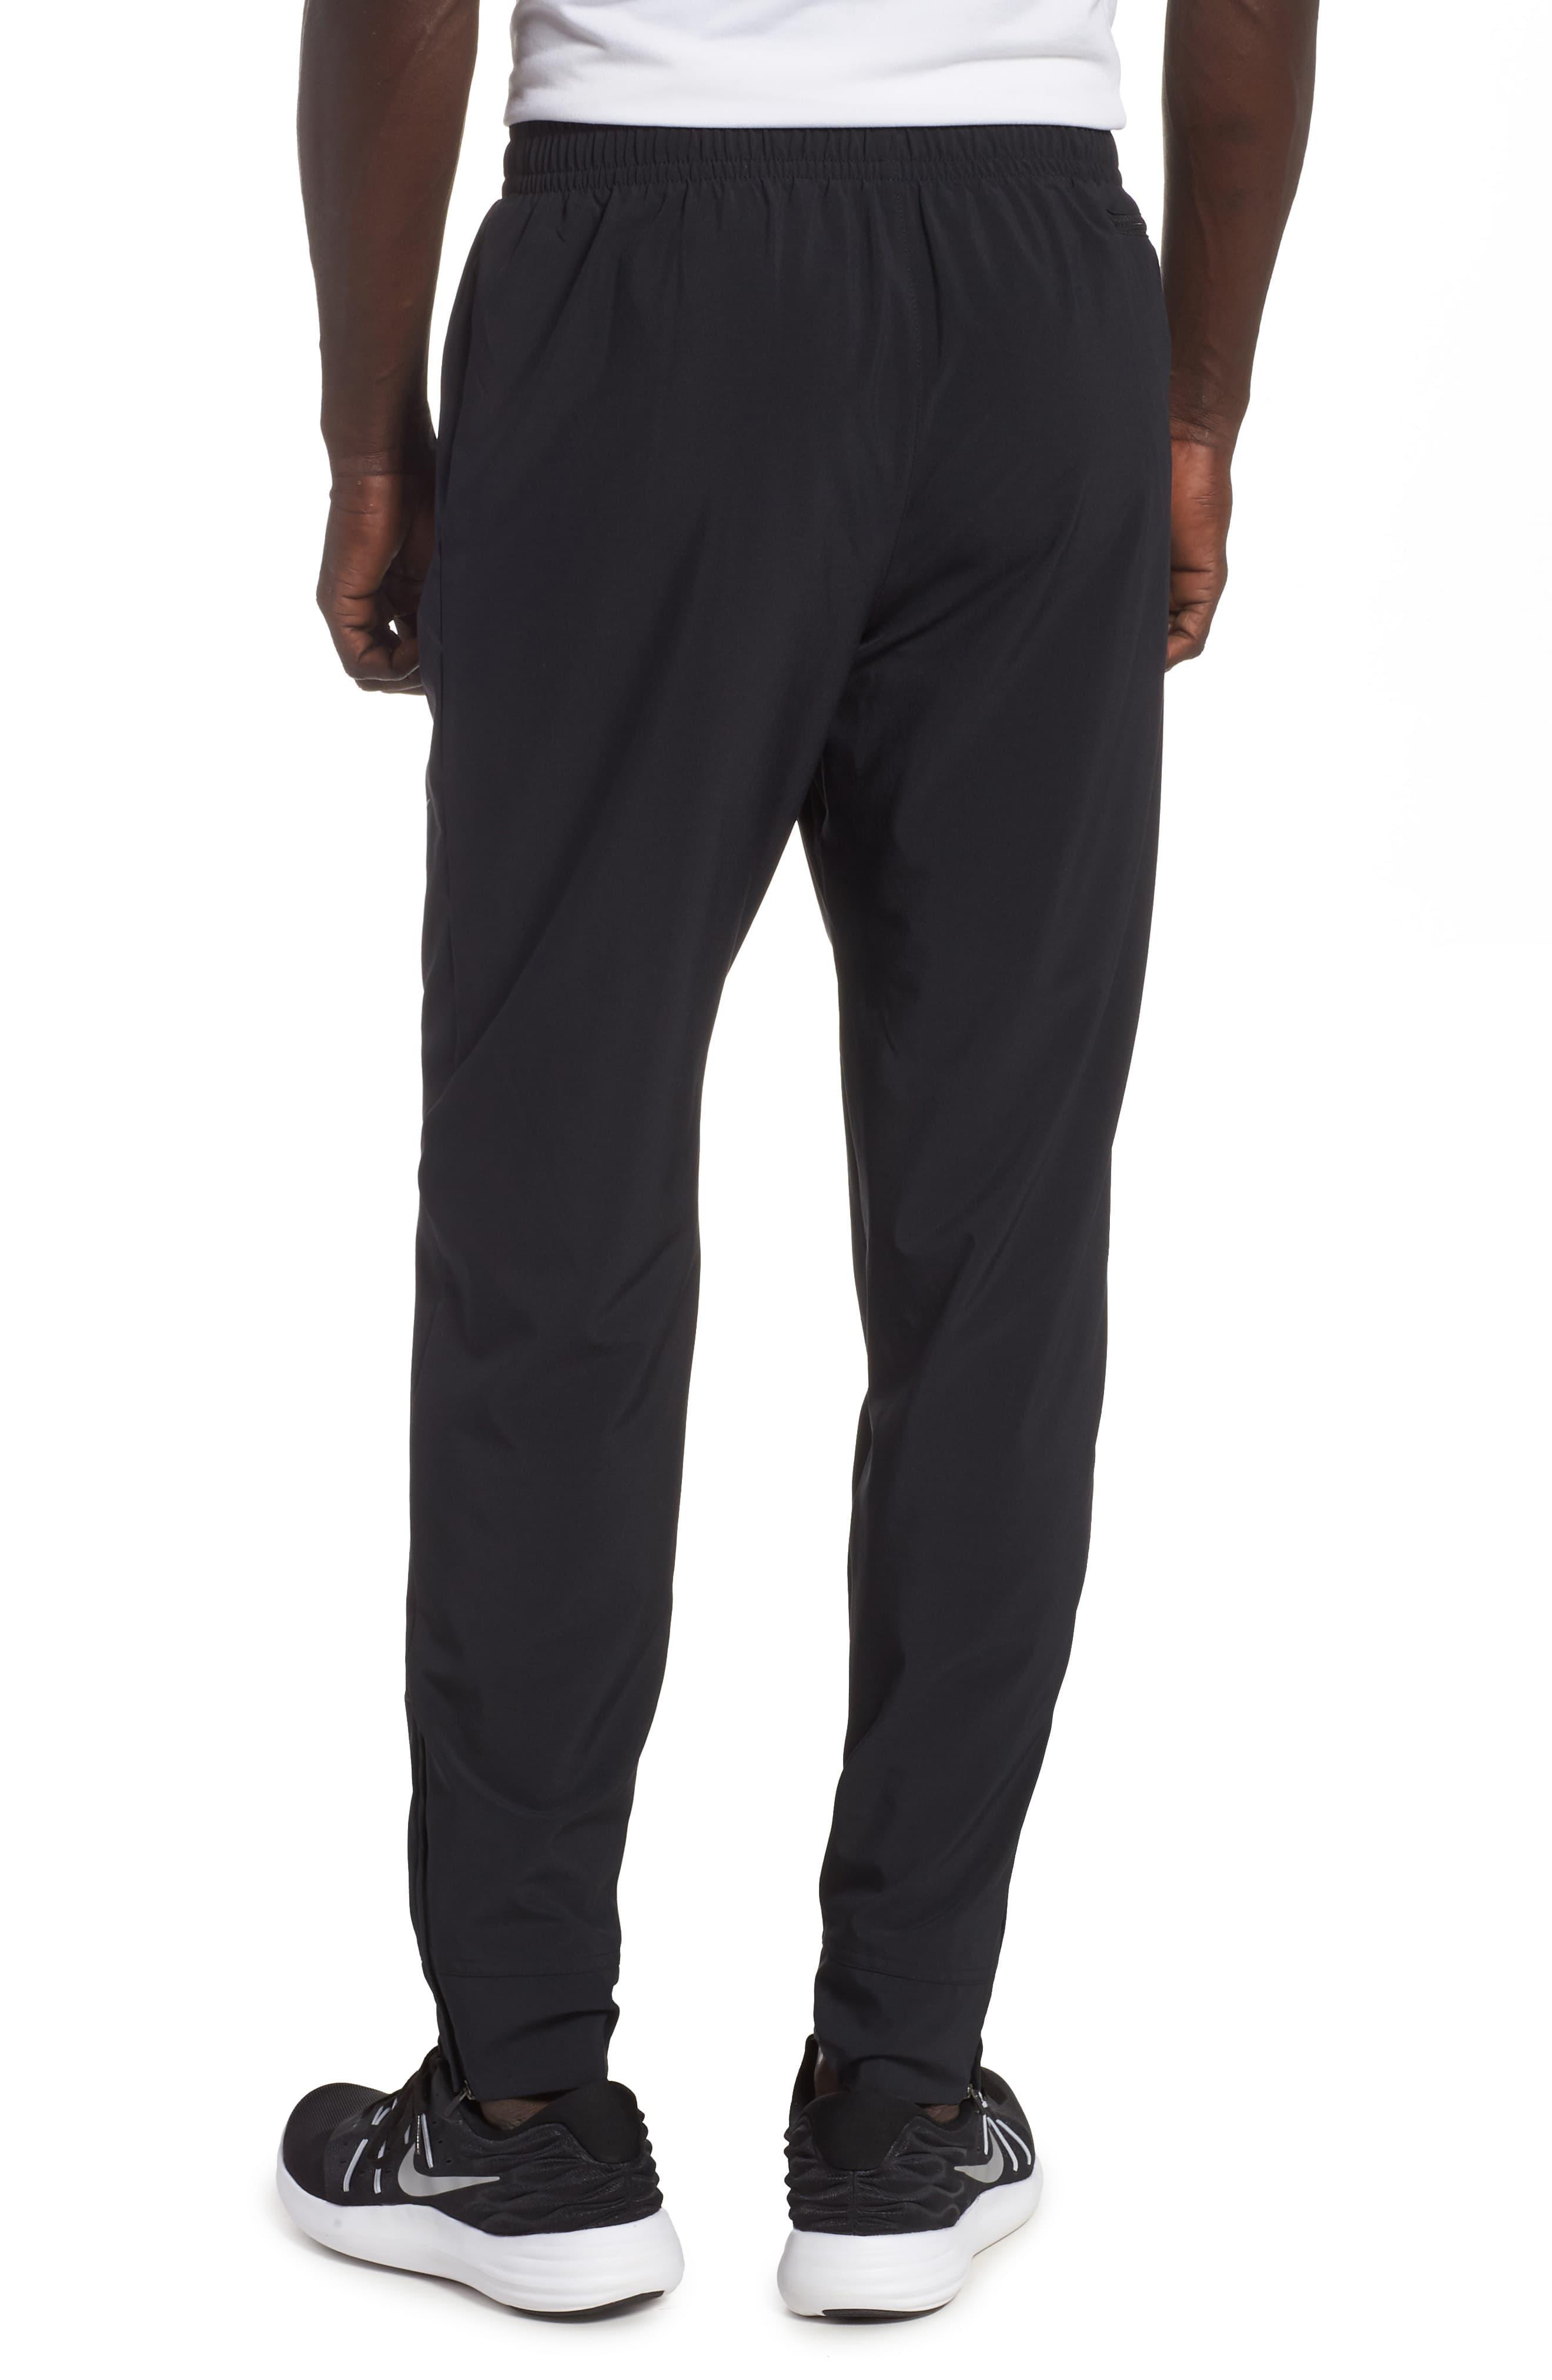 Nike Essential Woven Track Pants in Black for Men - Lyst